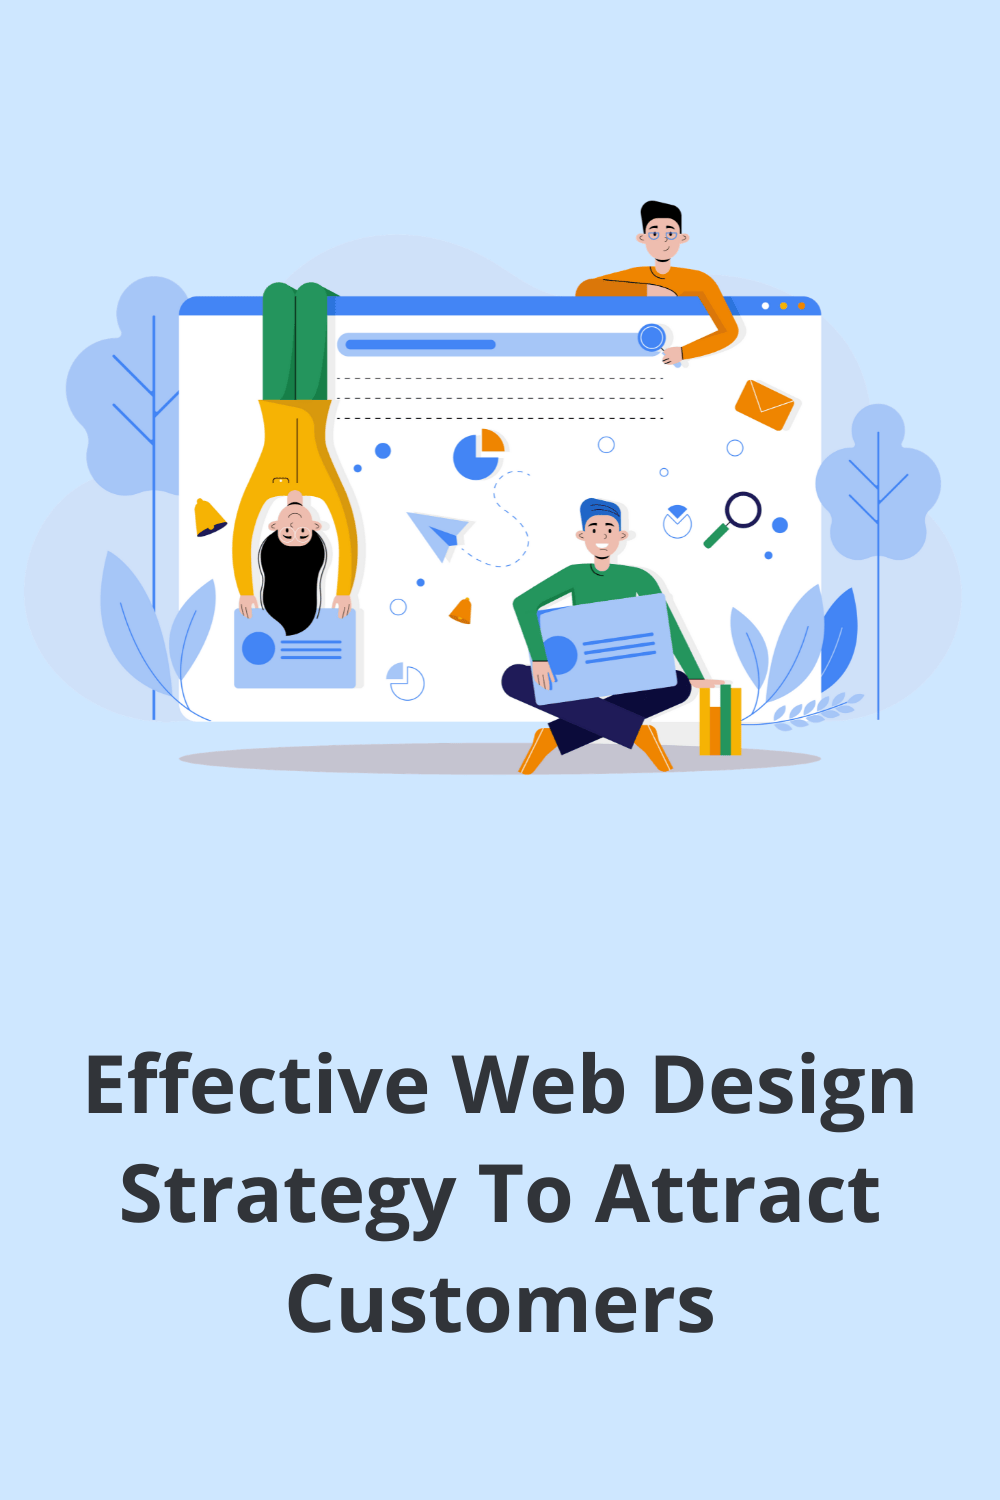 A well-designed website can attract the interest of many customers. Discussed here are the tips that can help you expand your reach and get more buyers. via @scopedesign